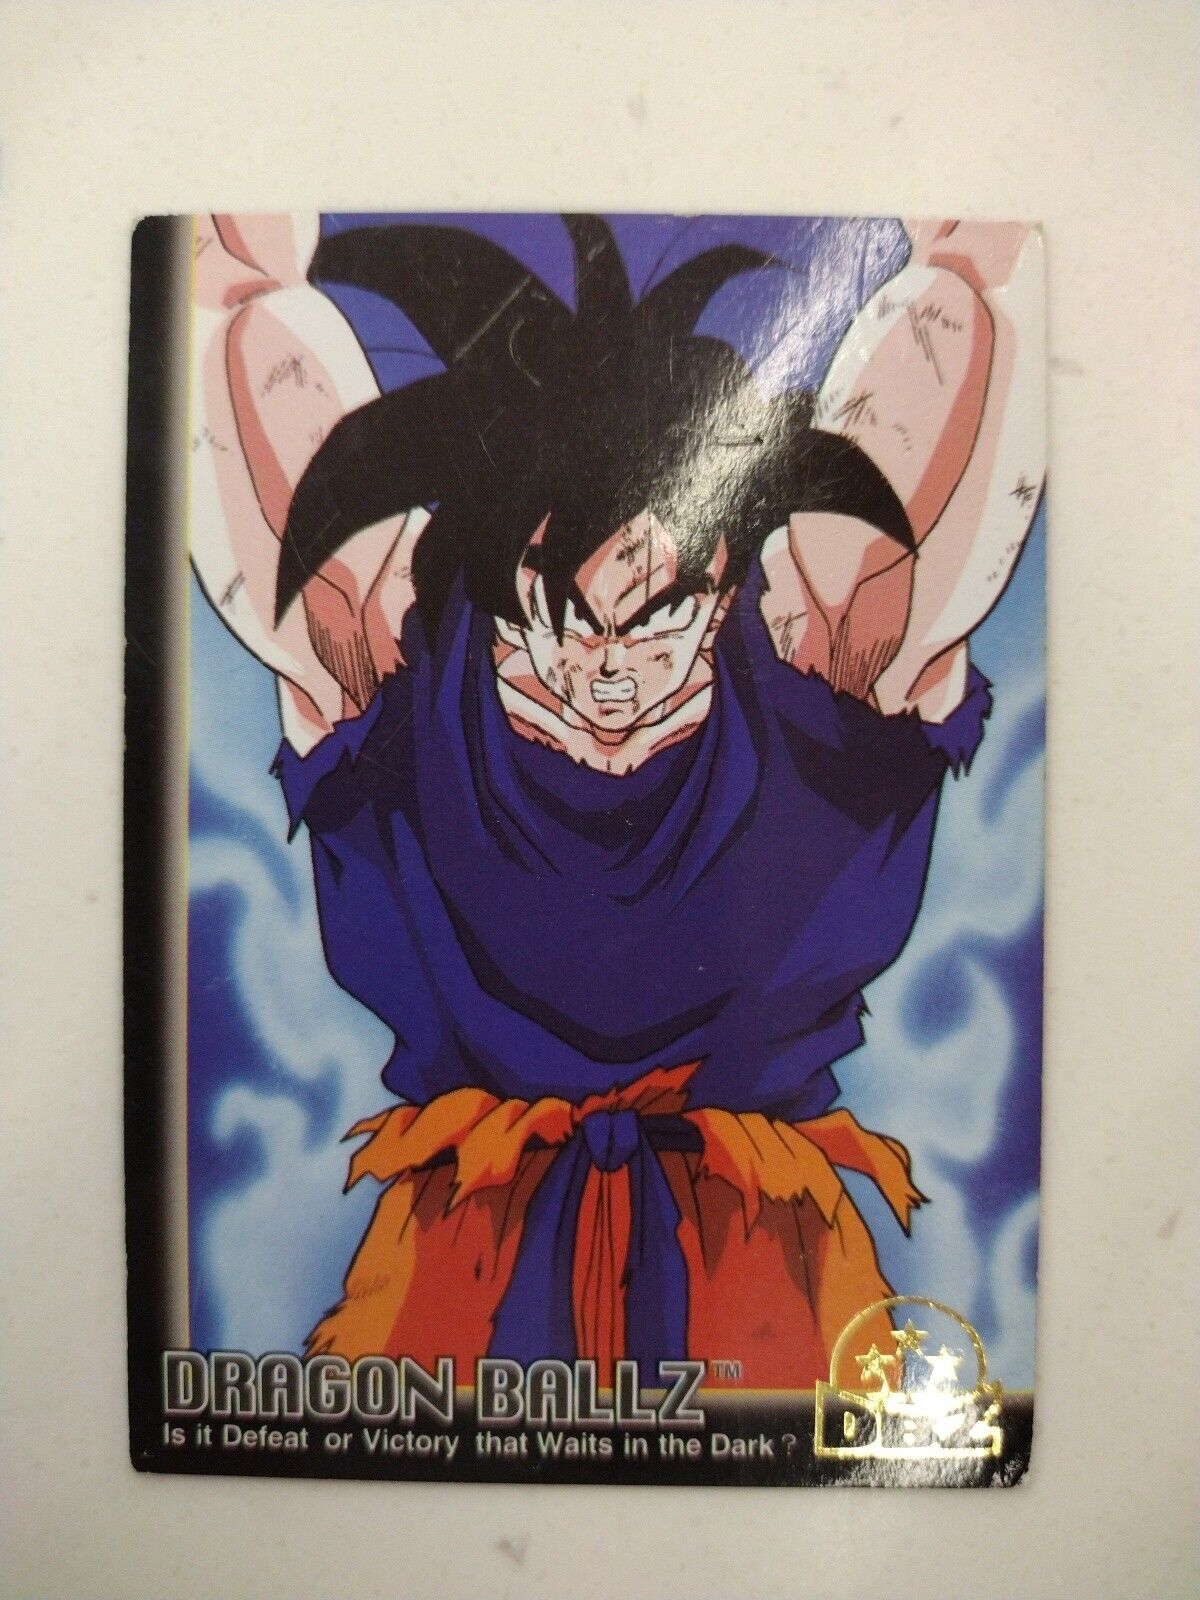 Dragon Ball Z "IS IT DEFEAT OR VICTORY THAT WAITS IN THE DARK?" 37 Card